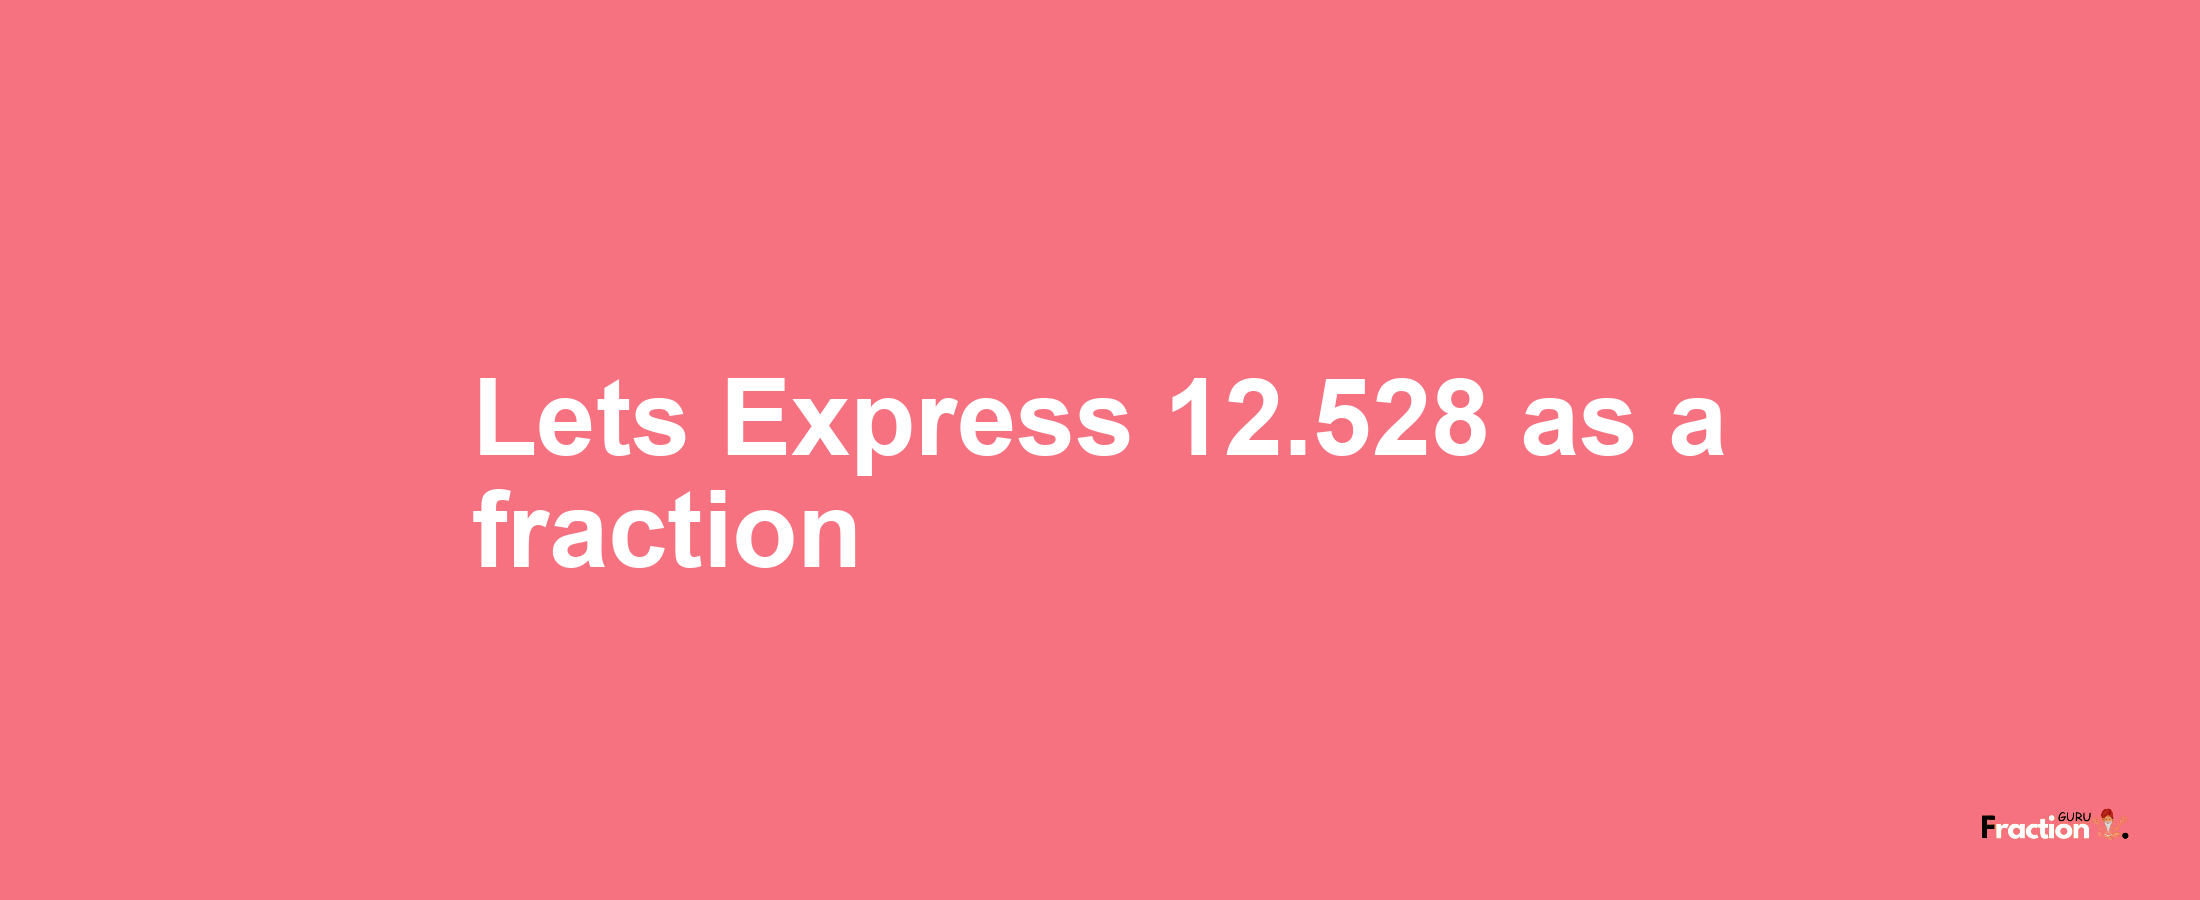 Lets Express 12.528 as afraction